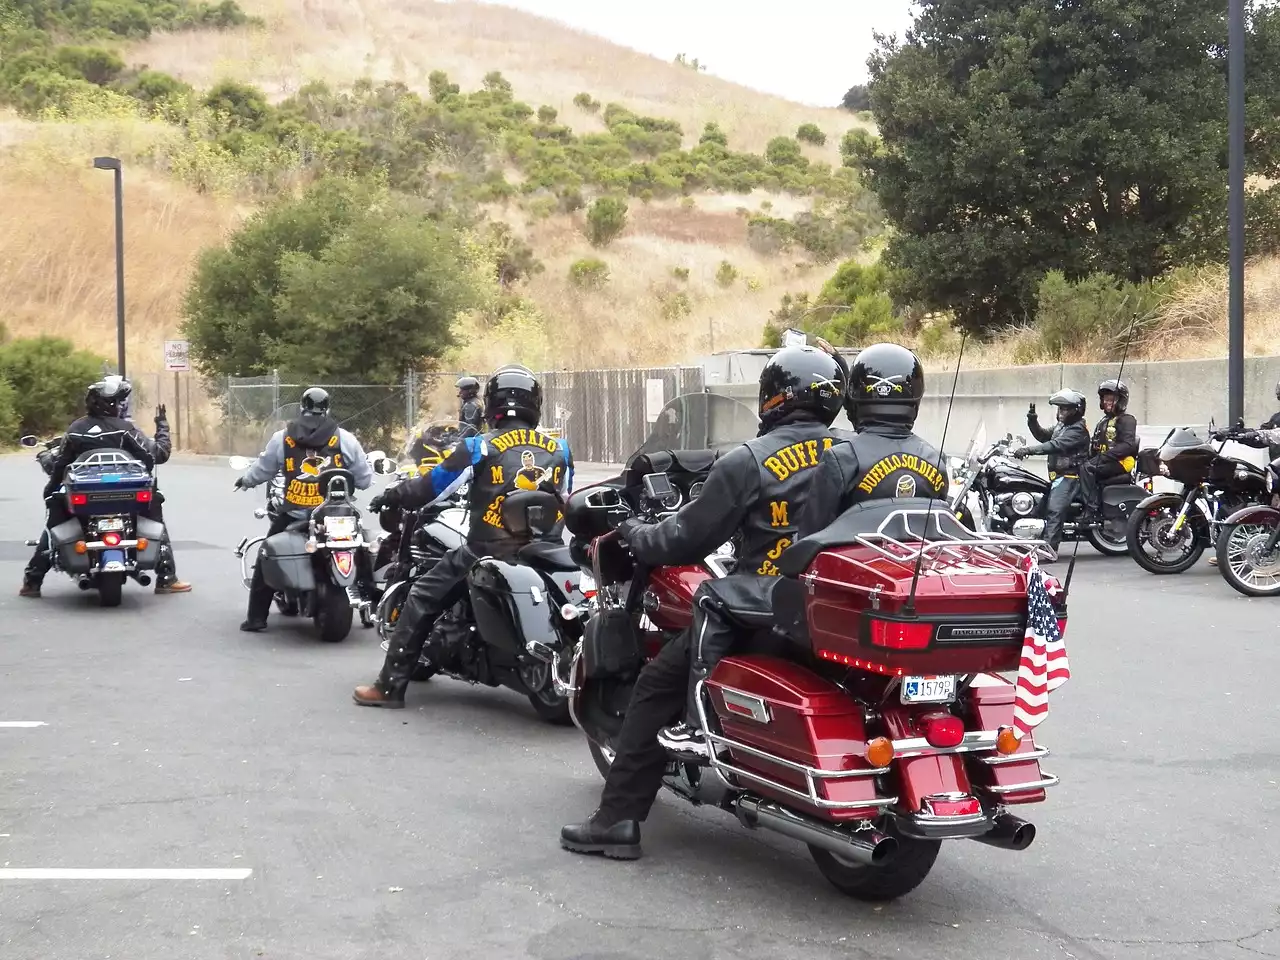 The Friendliest Motorcycle Clubs to Join